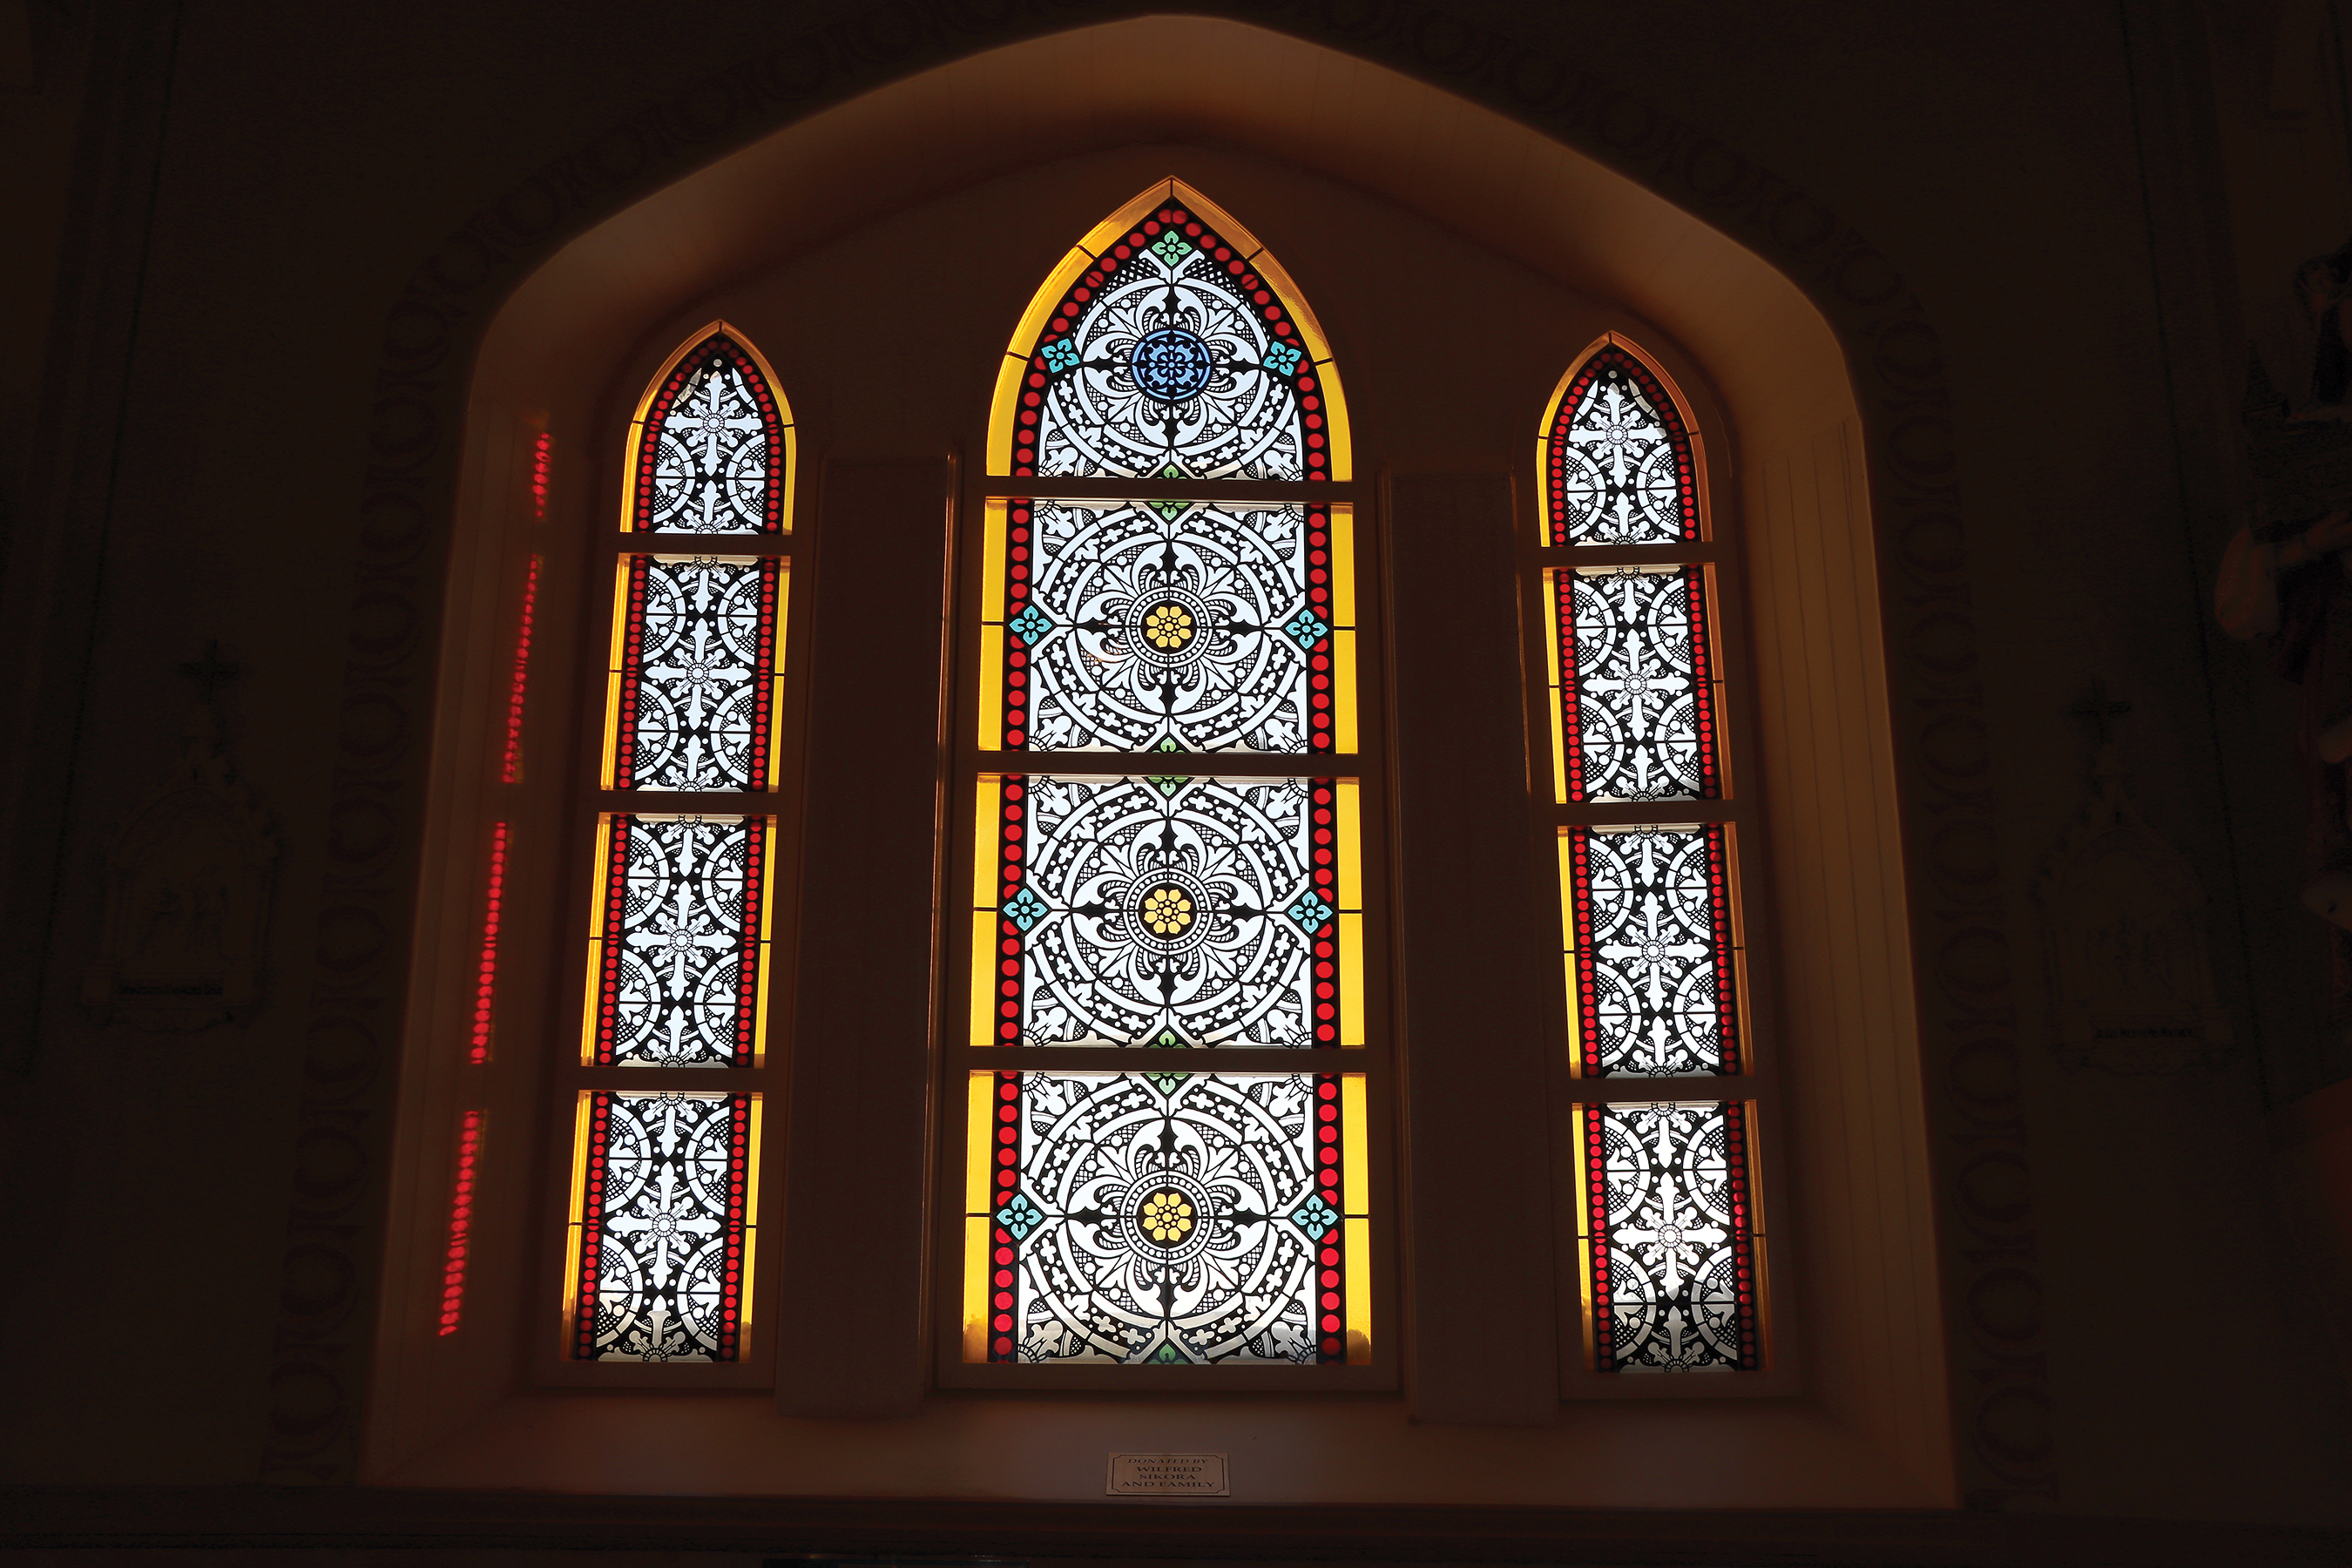 The stained glass windows at Kaposvar Church. The Hungarian embassy donated $40,000 toward four banks of new stained glass windows at the church.